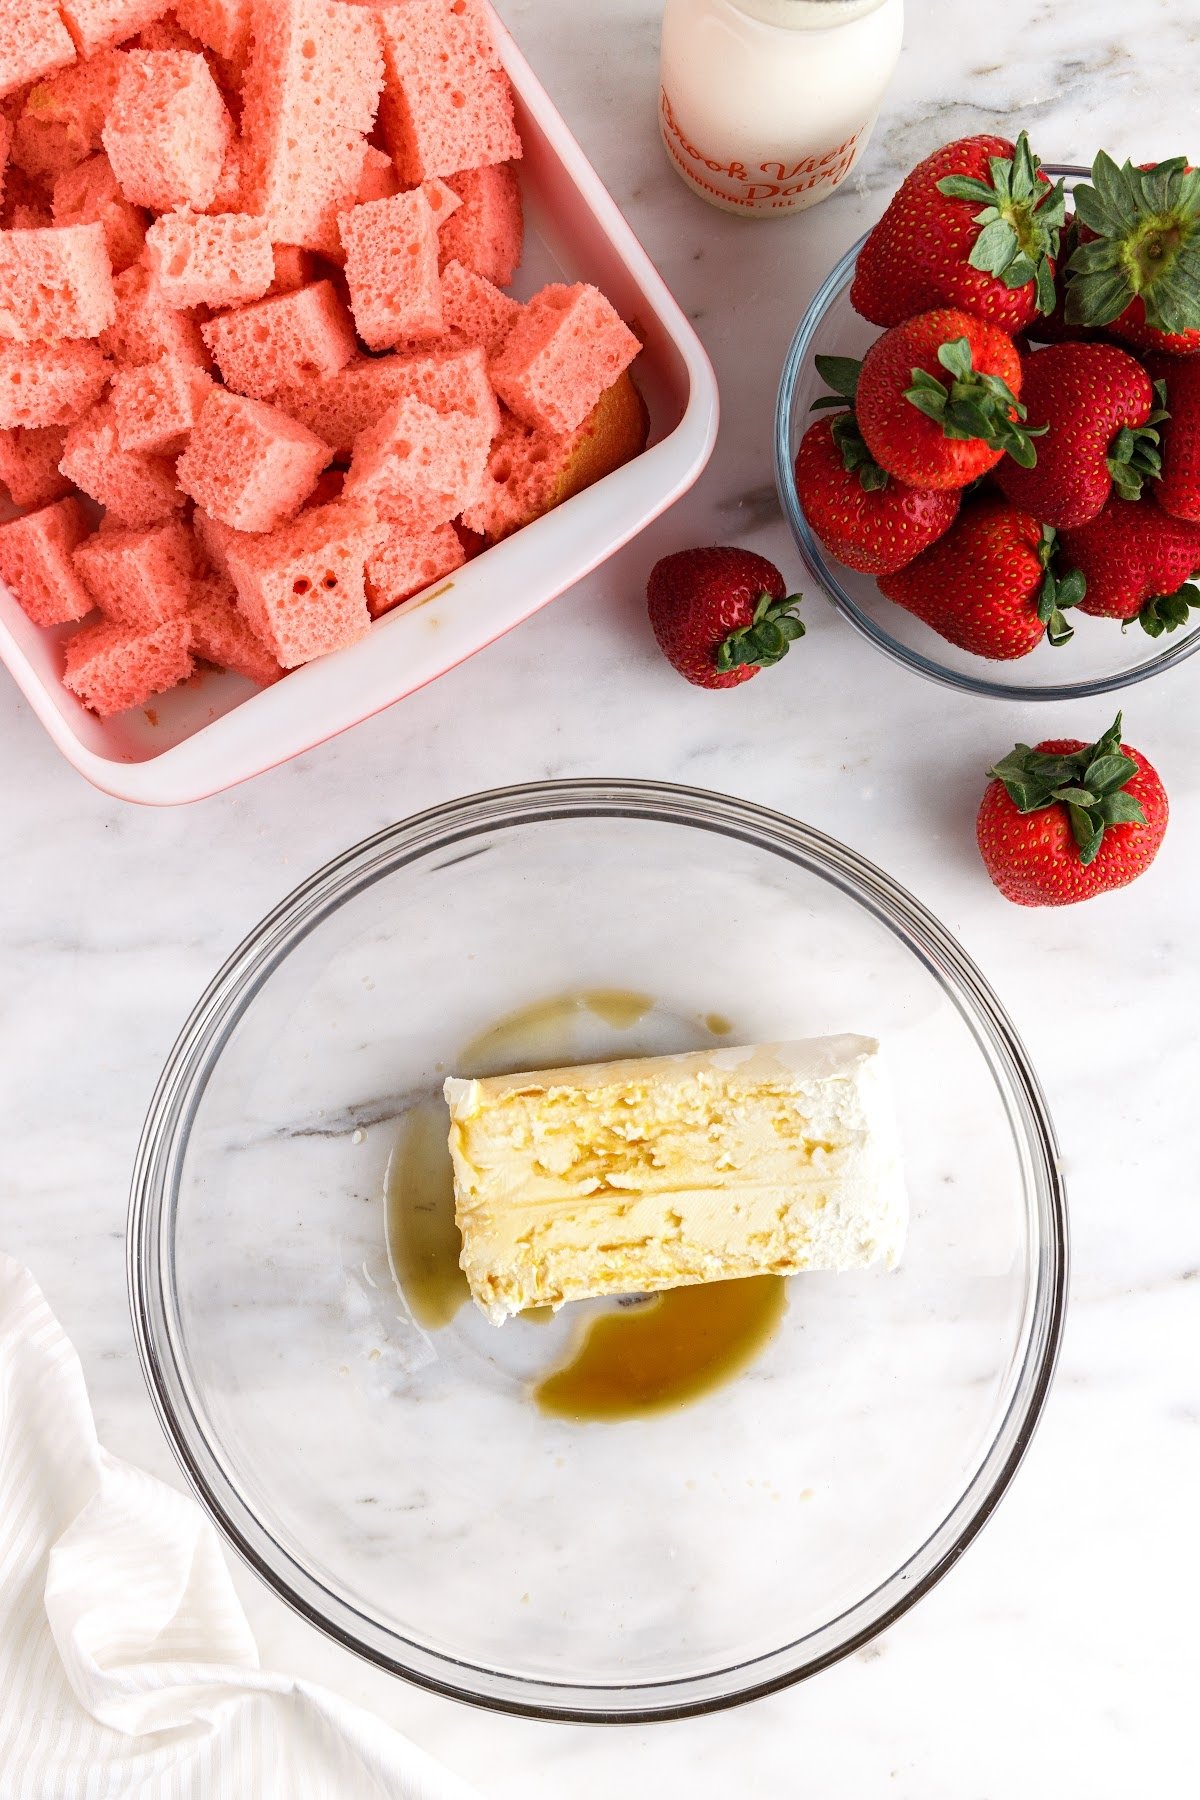 Block of cream cheese and vanilla extract in glass bowl, next to cubes of strawberry cake and bowl of fresh strawberries.